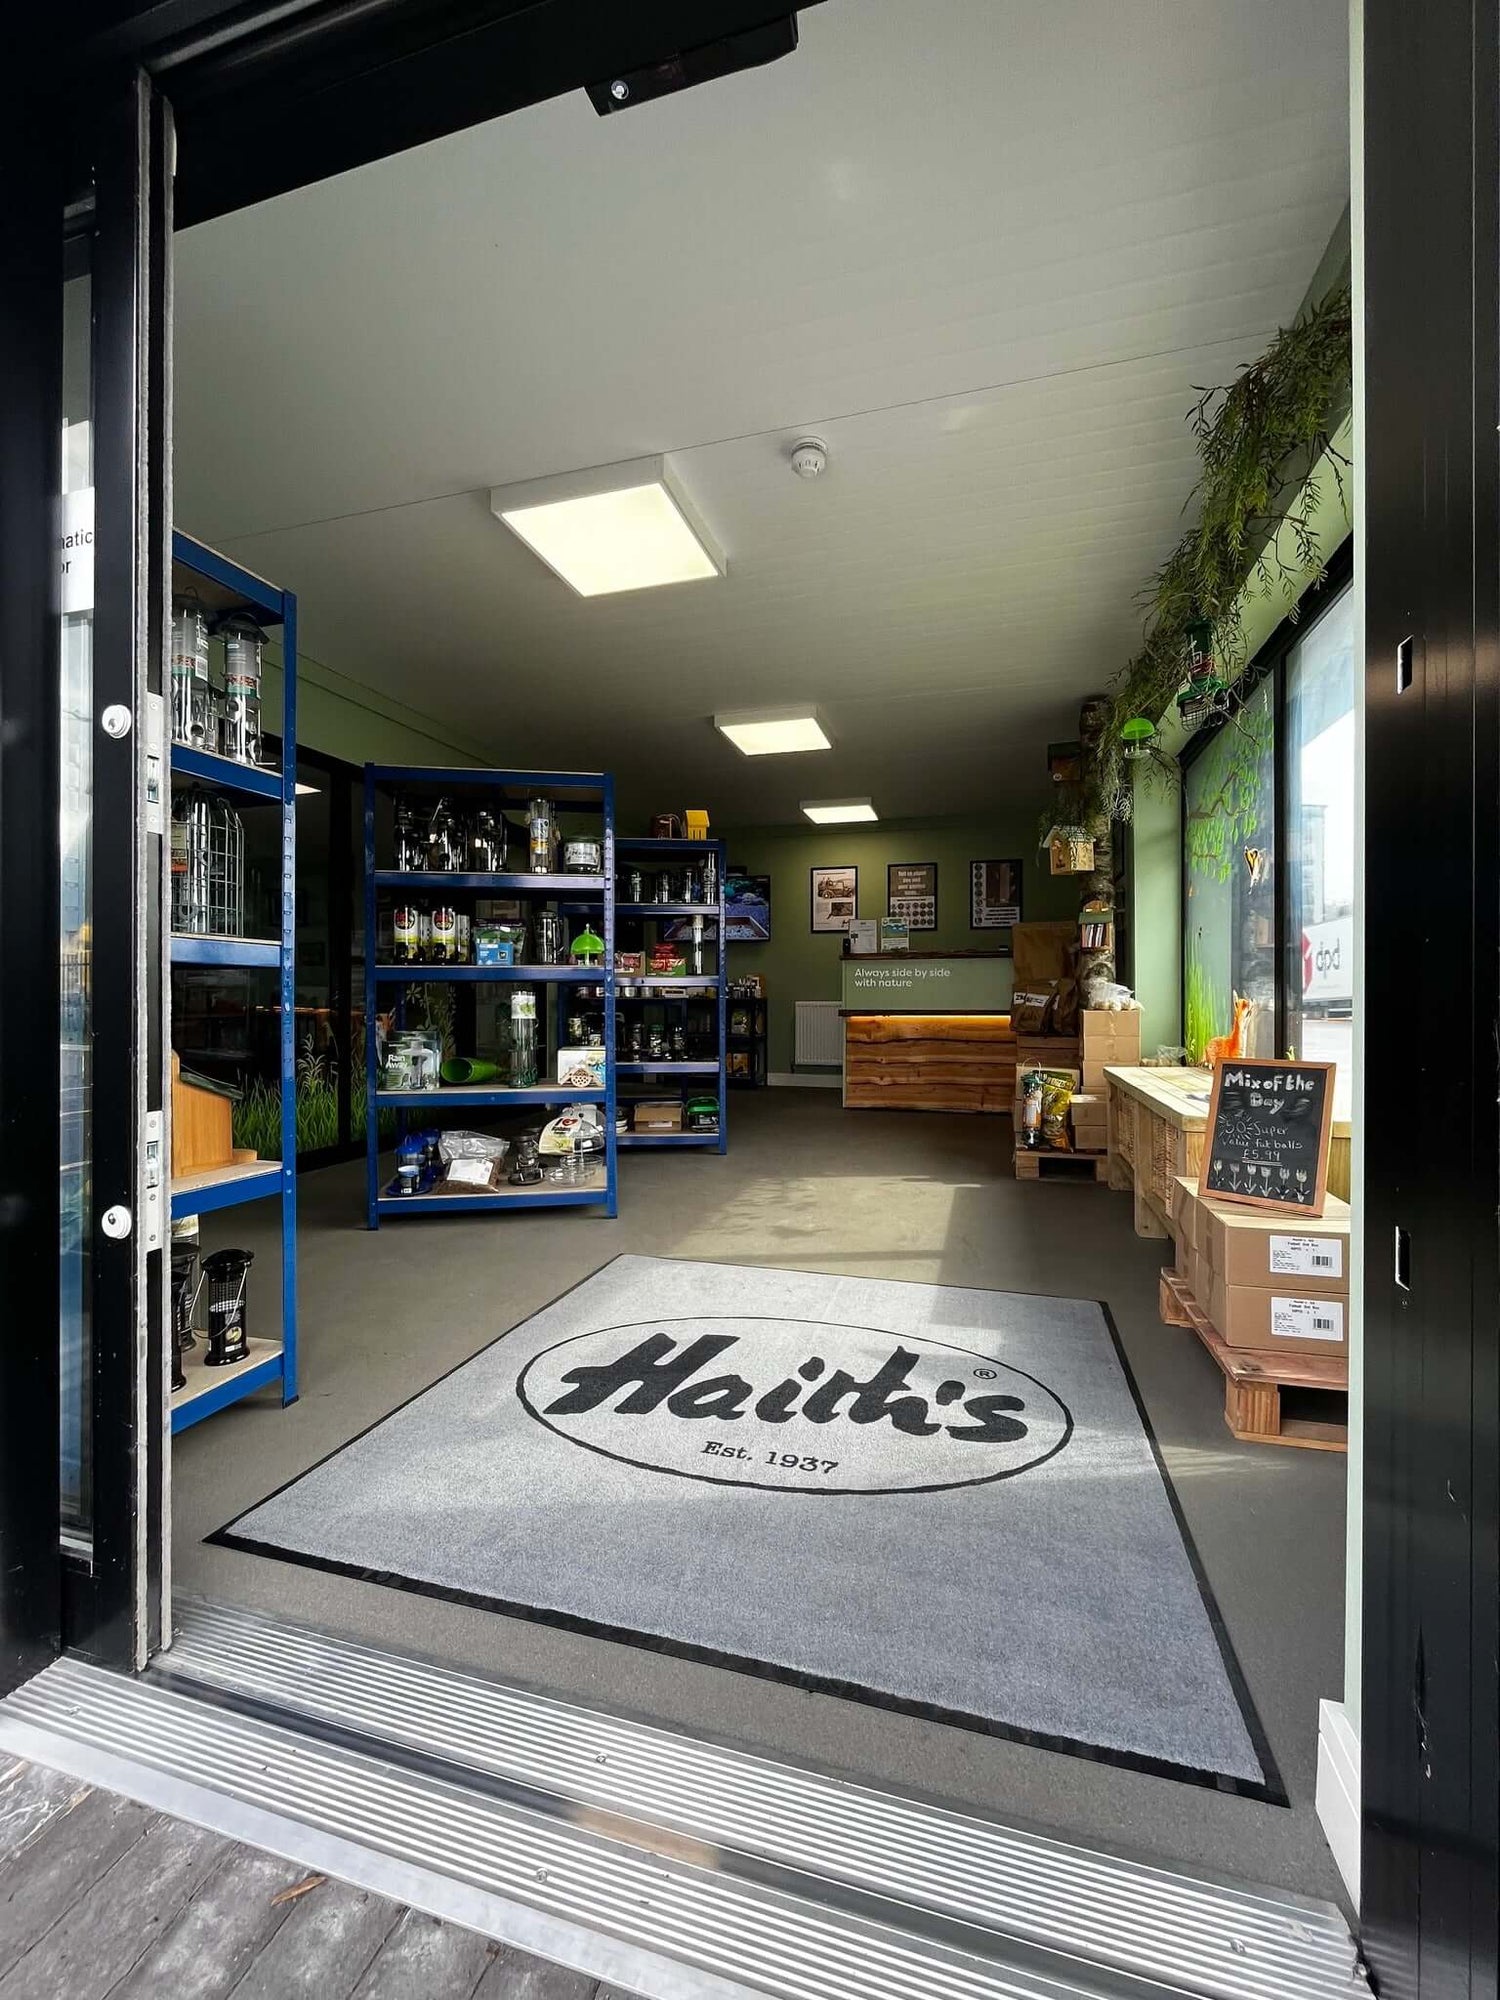 Haith's bird food centre shop in Louth, Lincolnshire